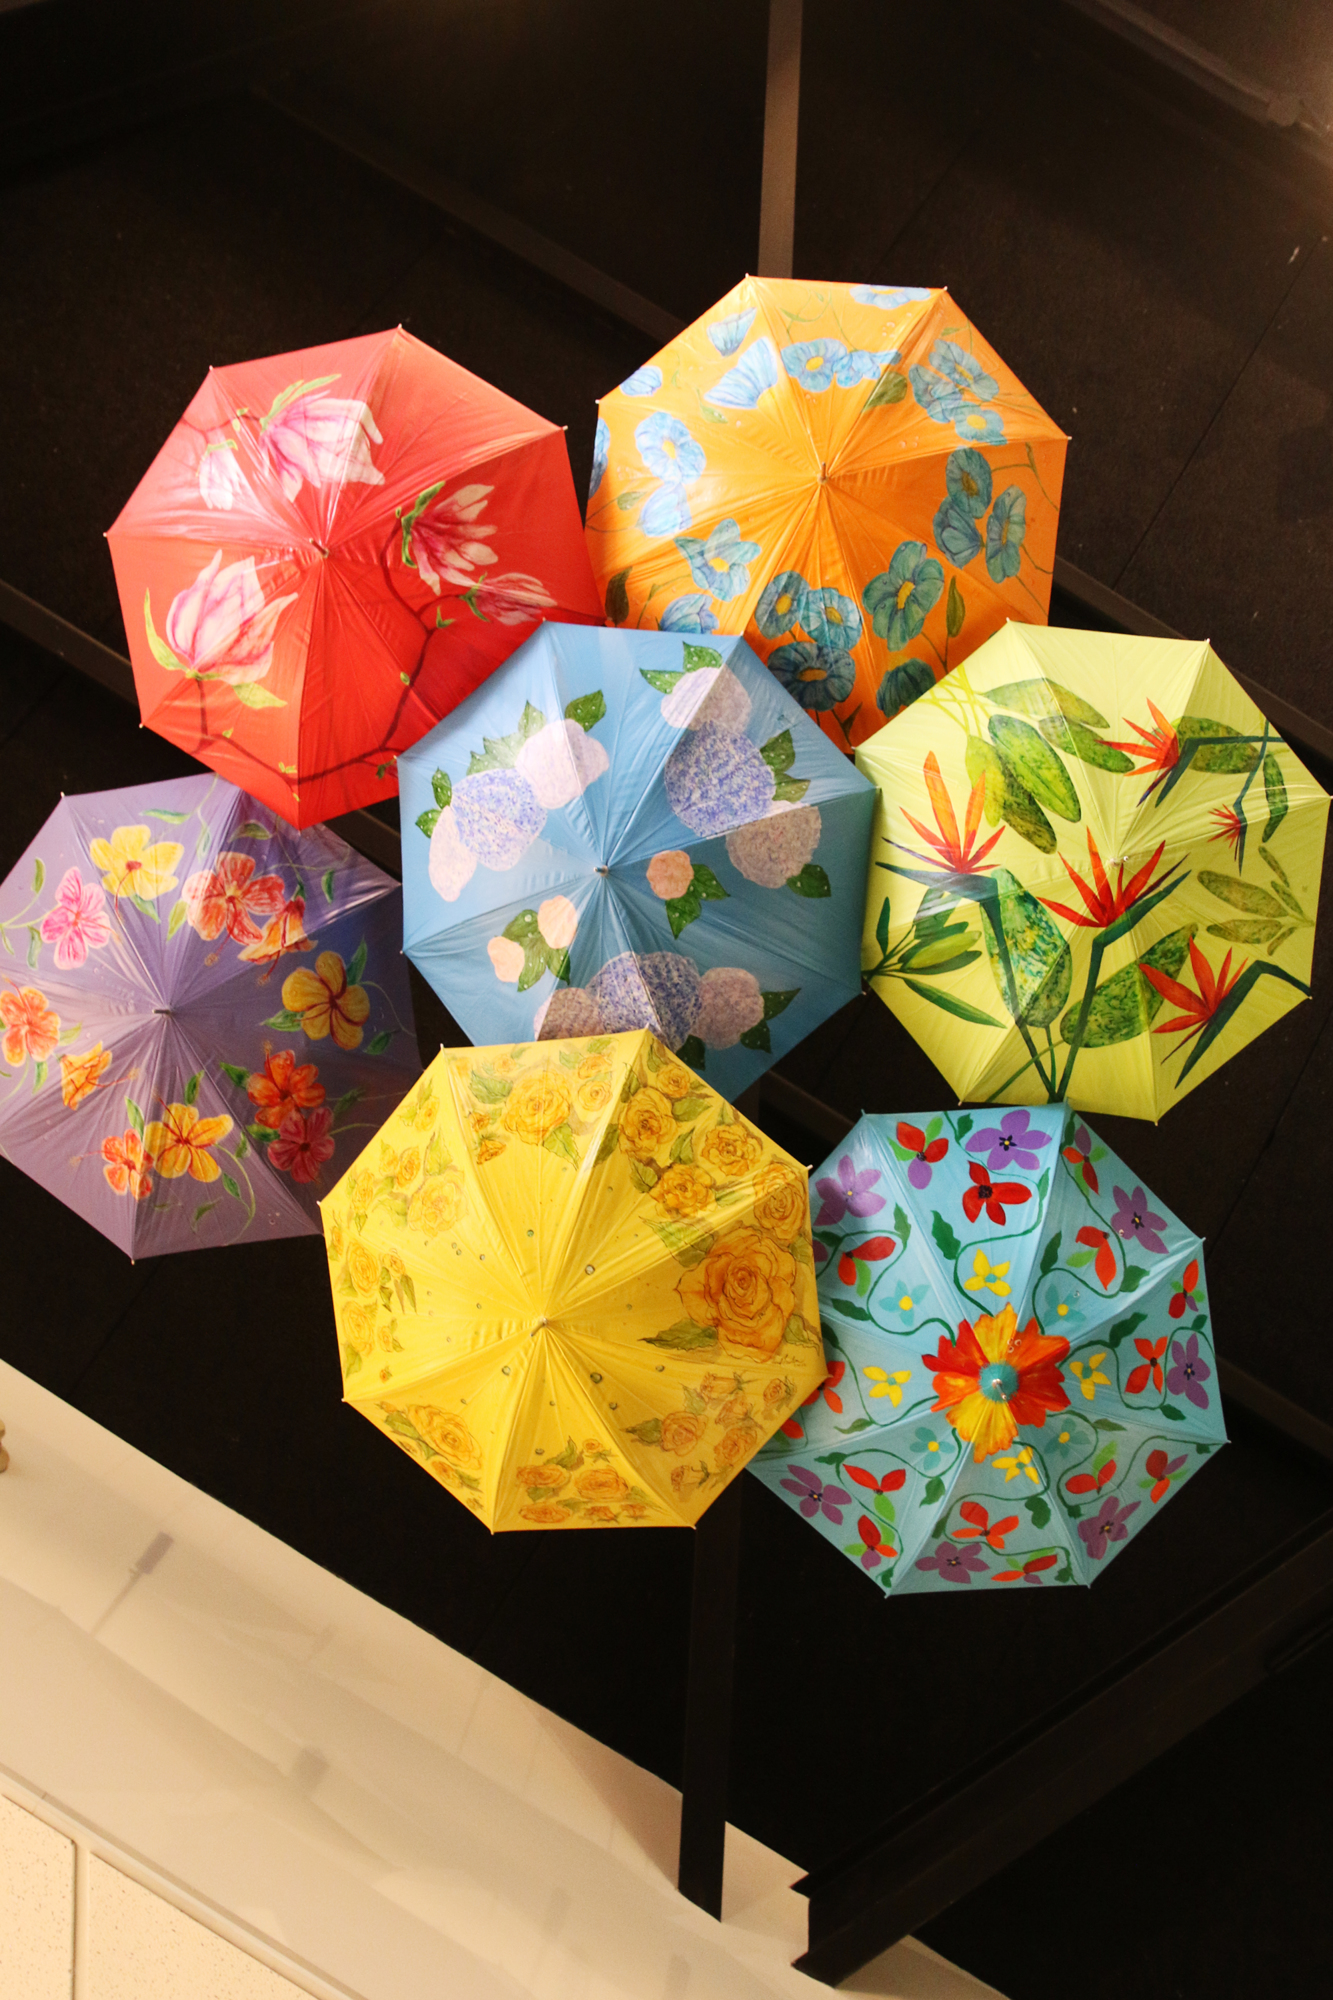 The inspiration behind this cluster of floral umbrellas was the rainbow. Photo by Jarleene Almenas